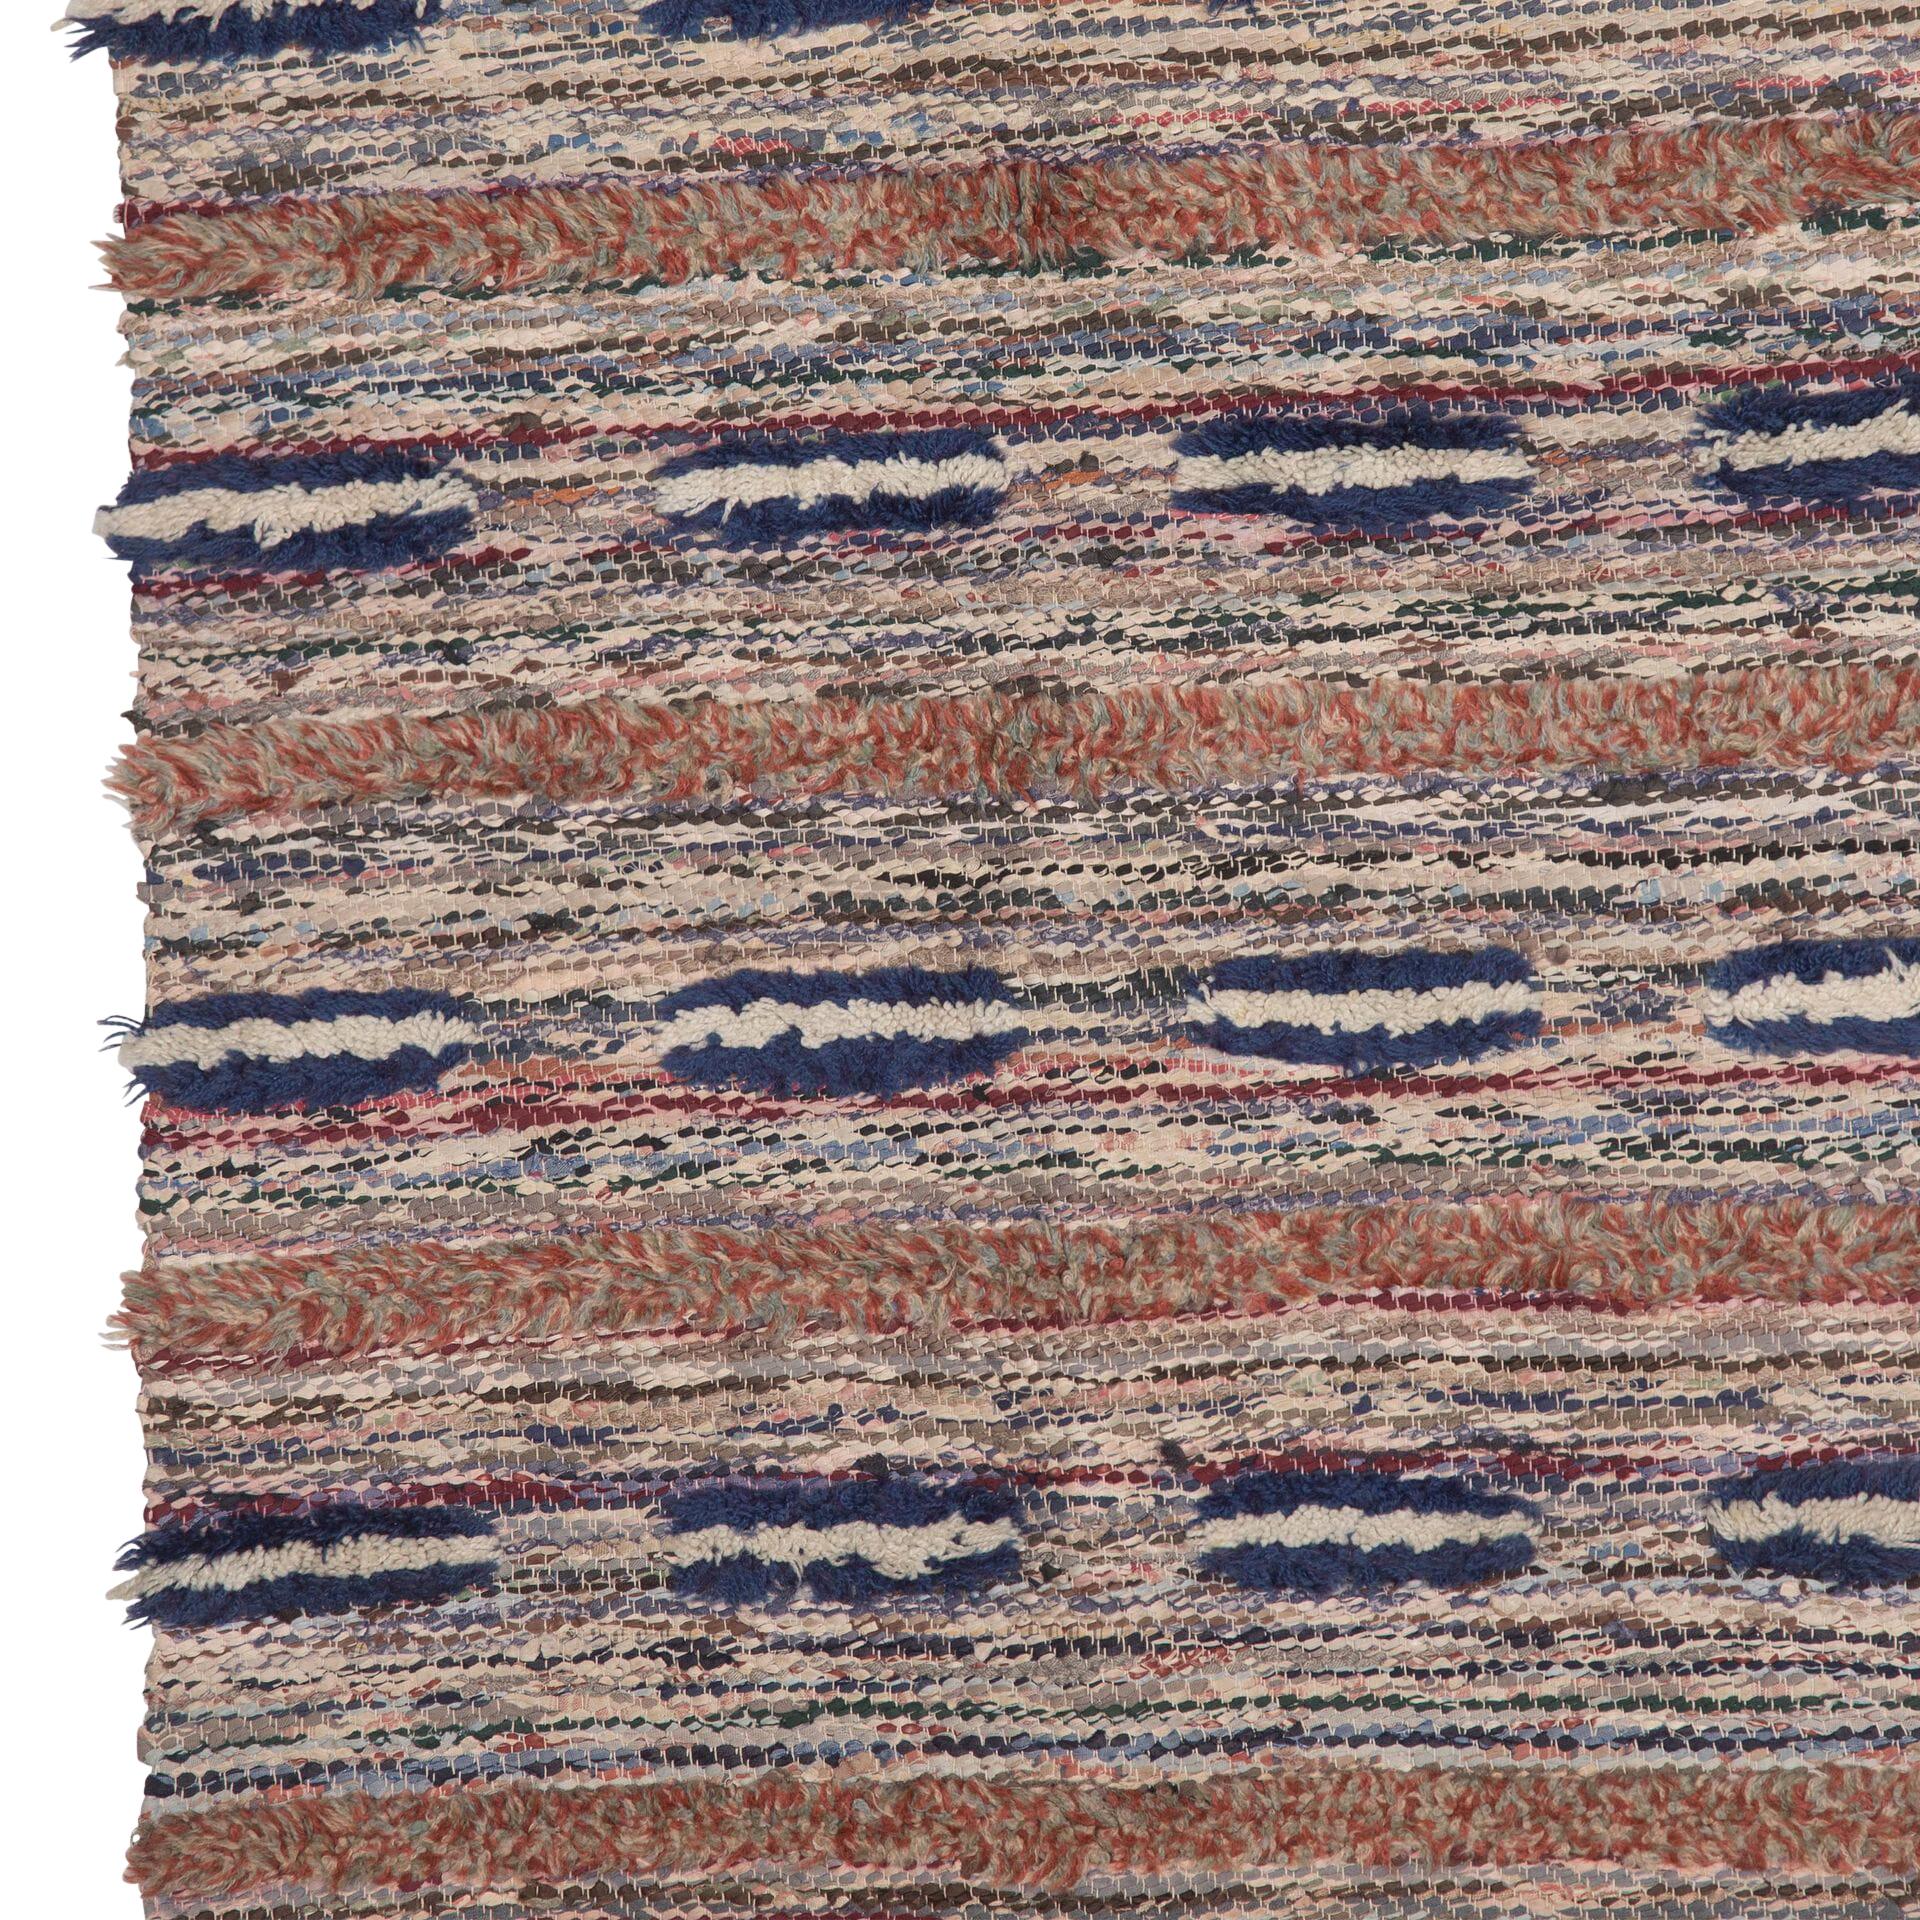 20th Century traditional Swedish rug in blue, green and orange.
With a textured feel throughout.